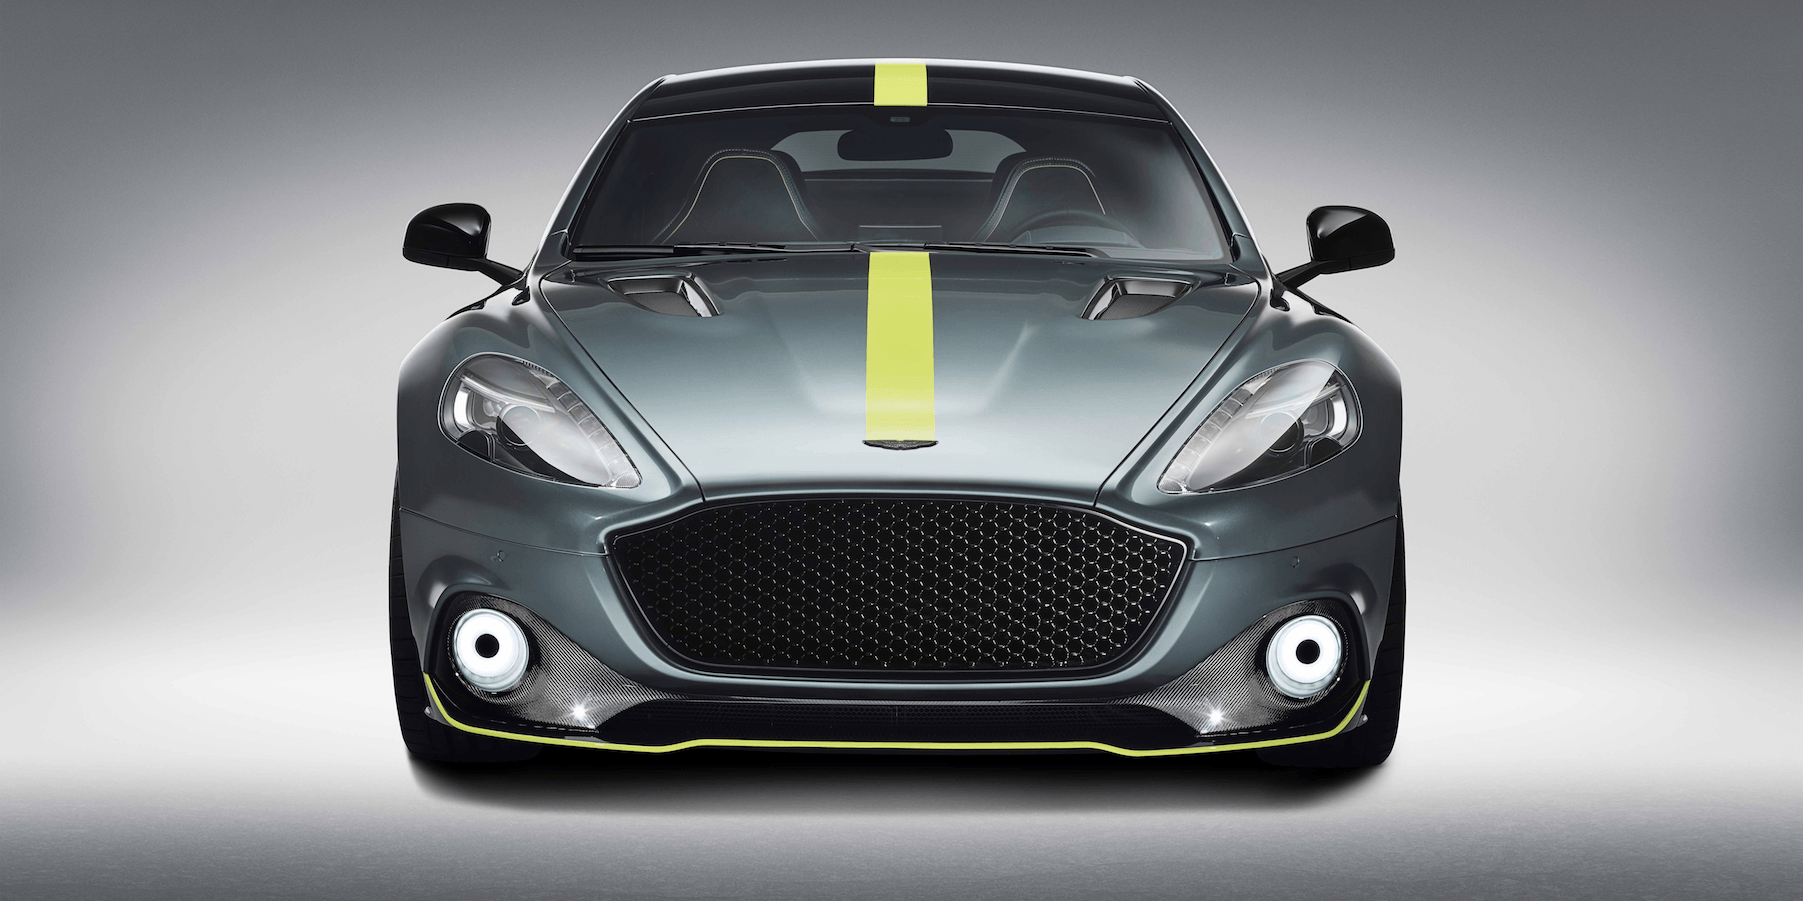 Aston Martin Rapide AMR Specs, Picture, Pricing